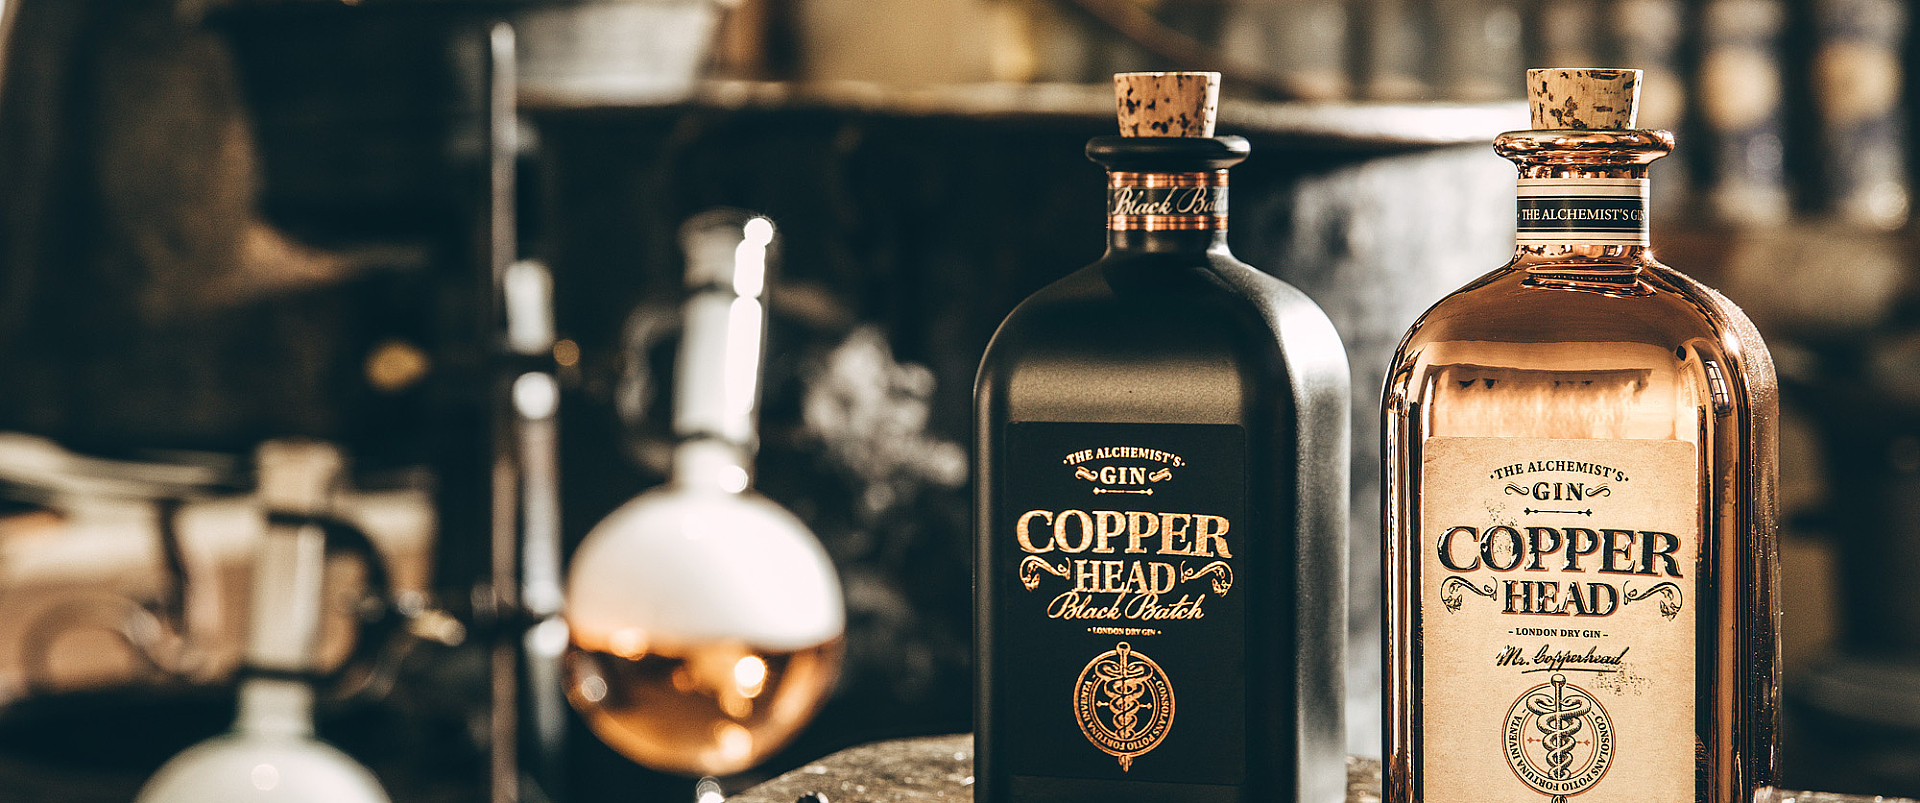 Productfotografie Copperhead Gin